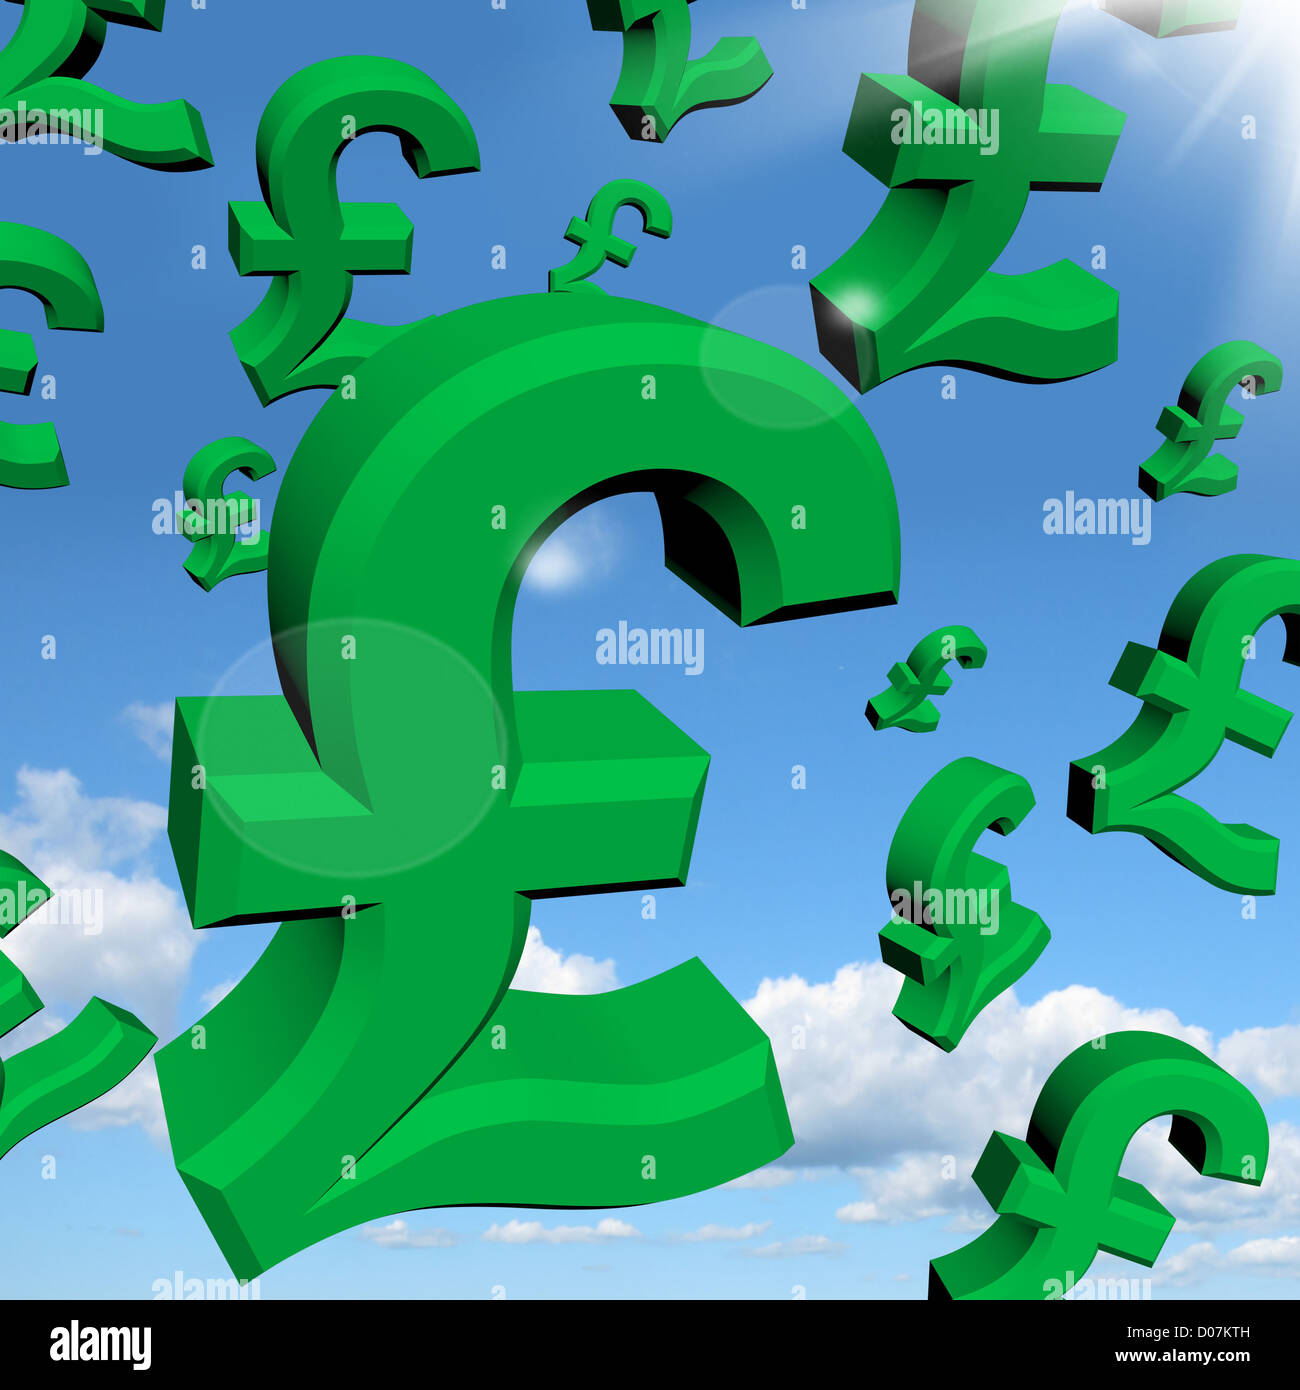 Pound Signs As Symbol For Money Or Wealthy Stock Photo